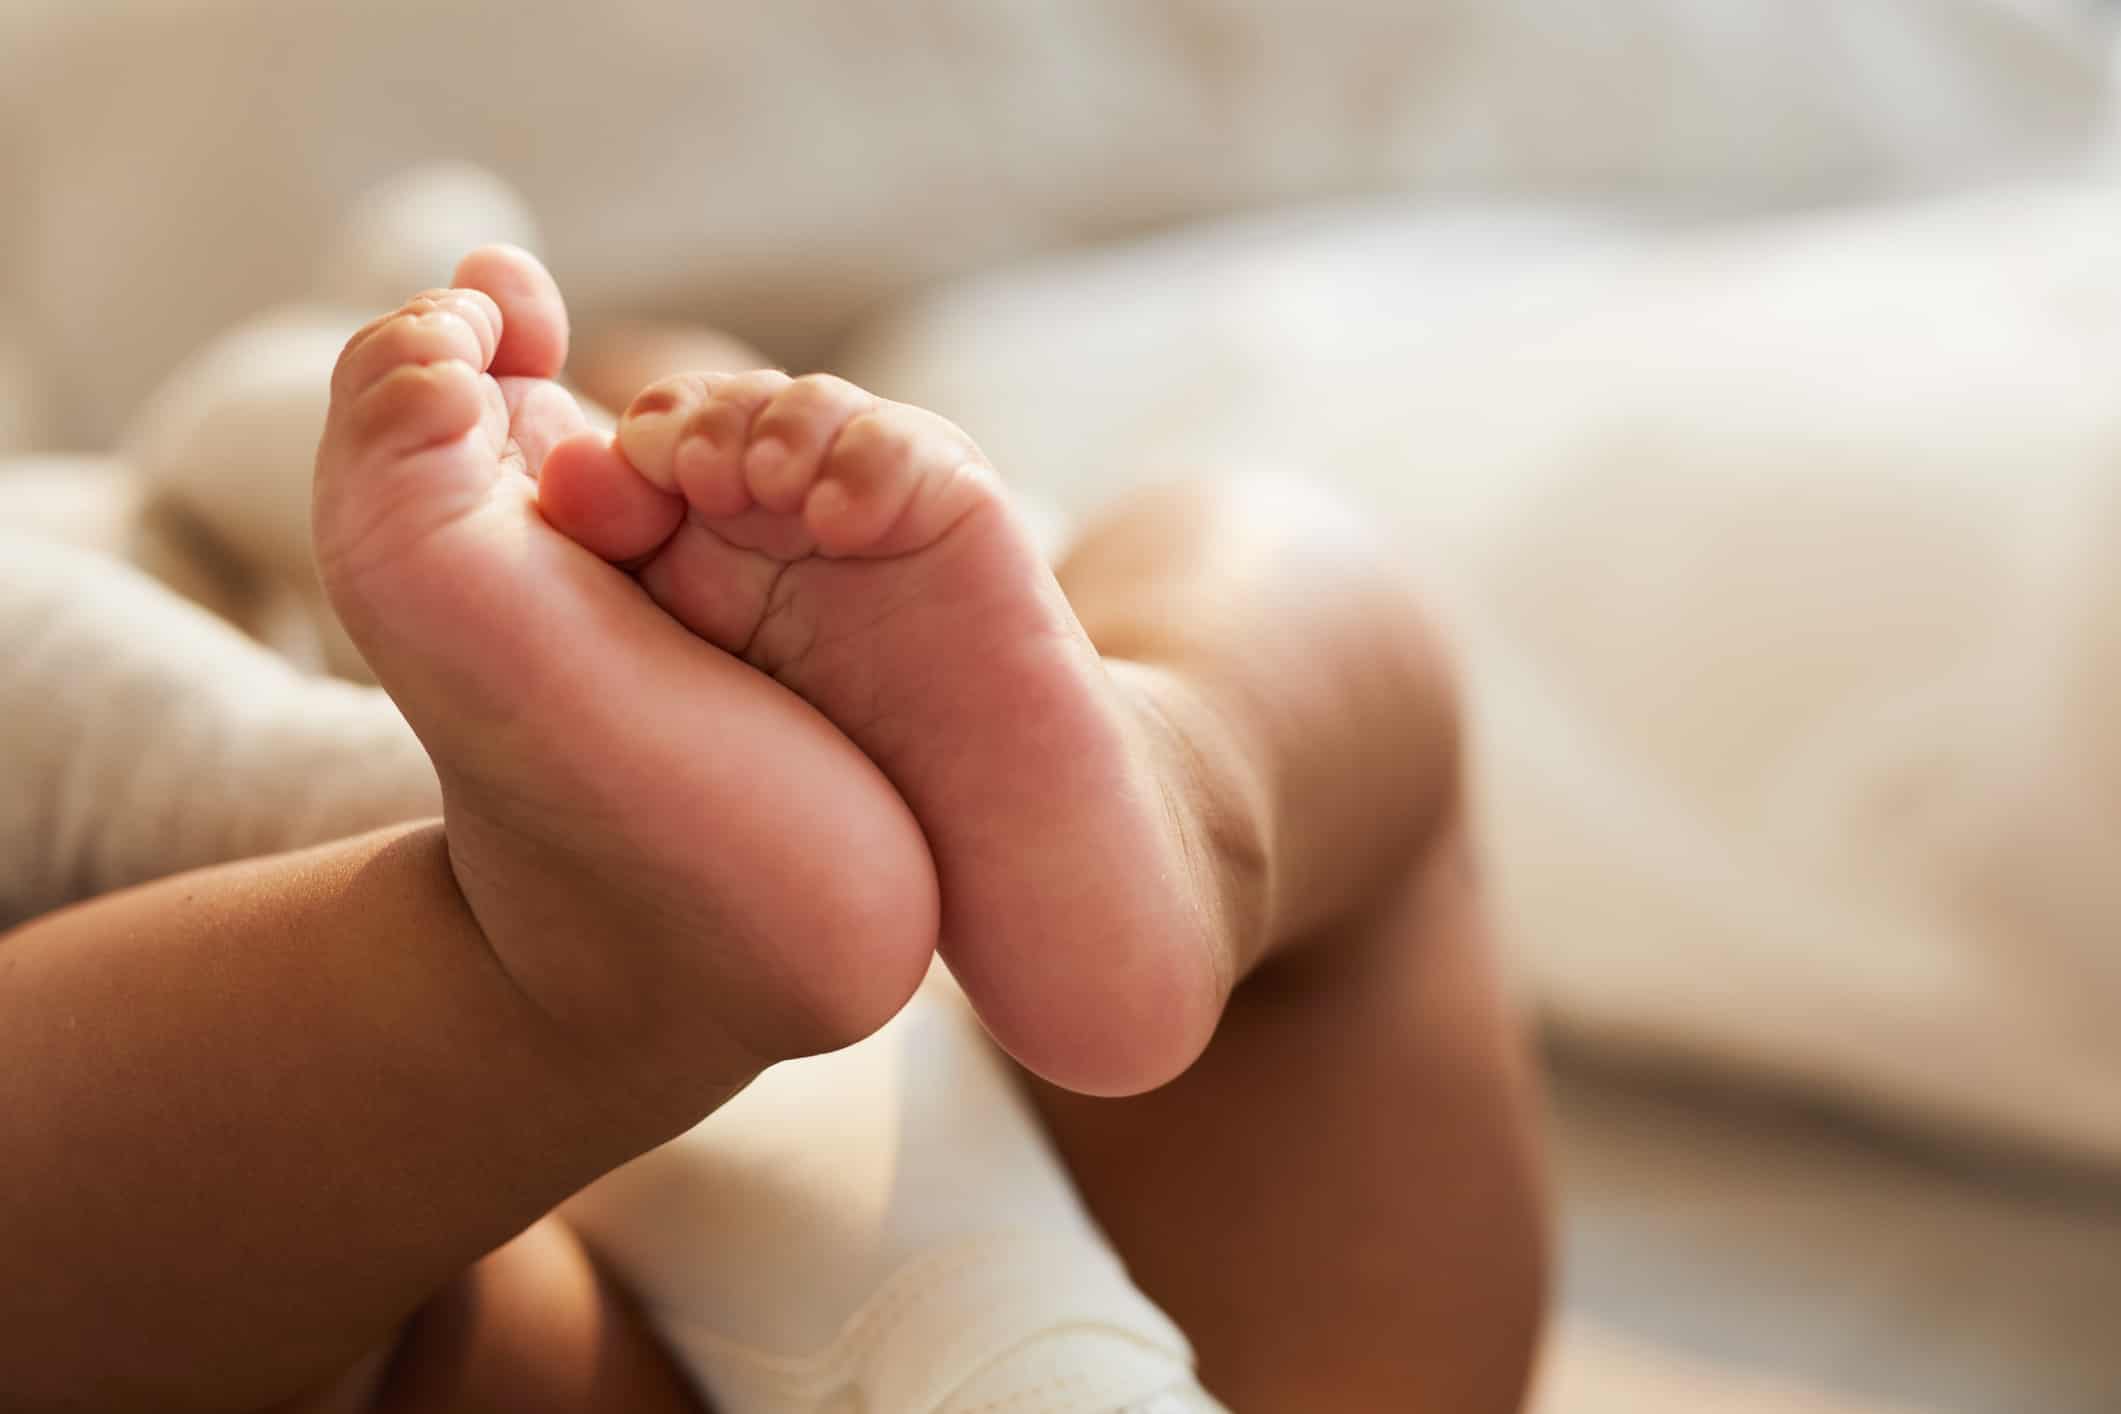 State Give Baby Up for Adoption